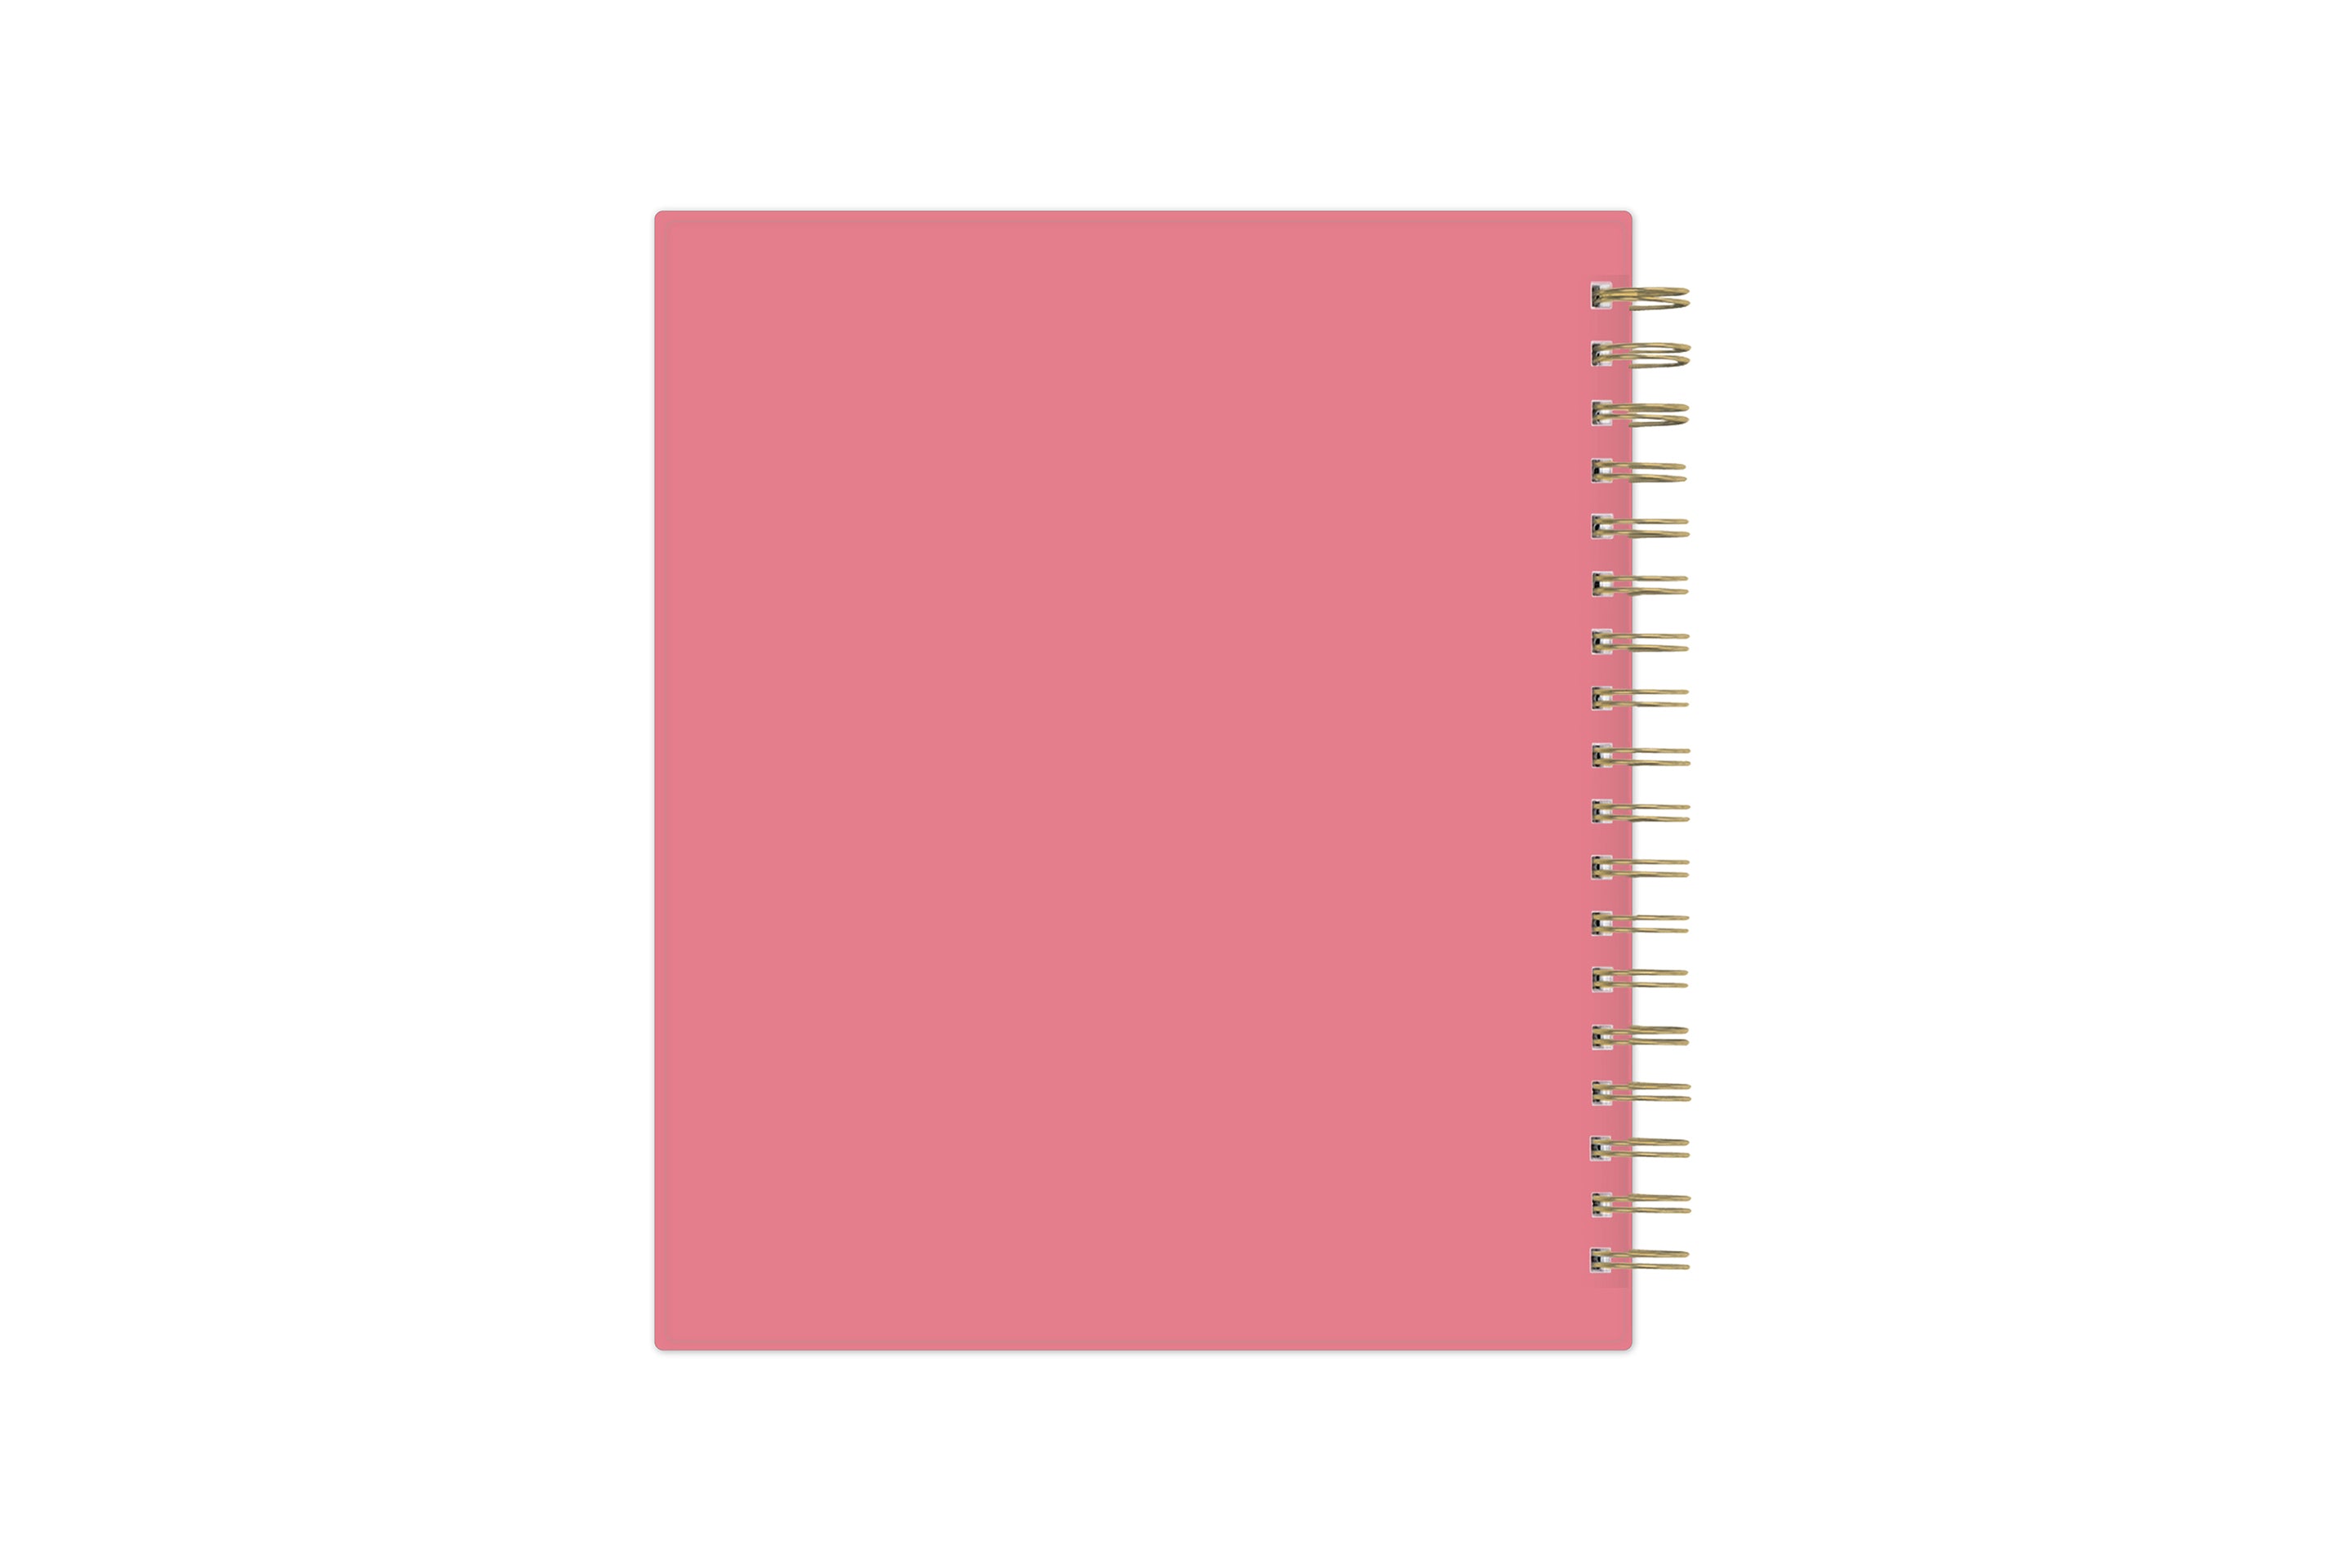 solid pink back cover in 8x10 planner size daily